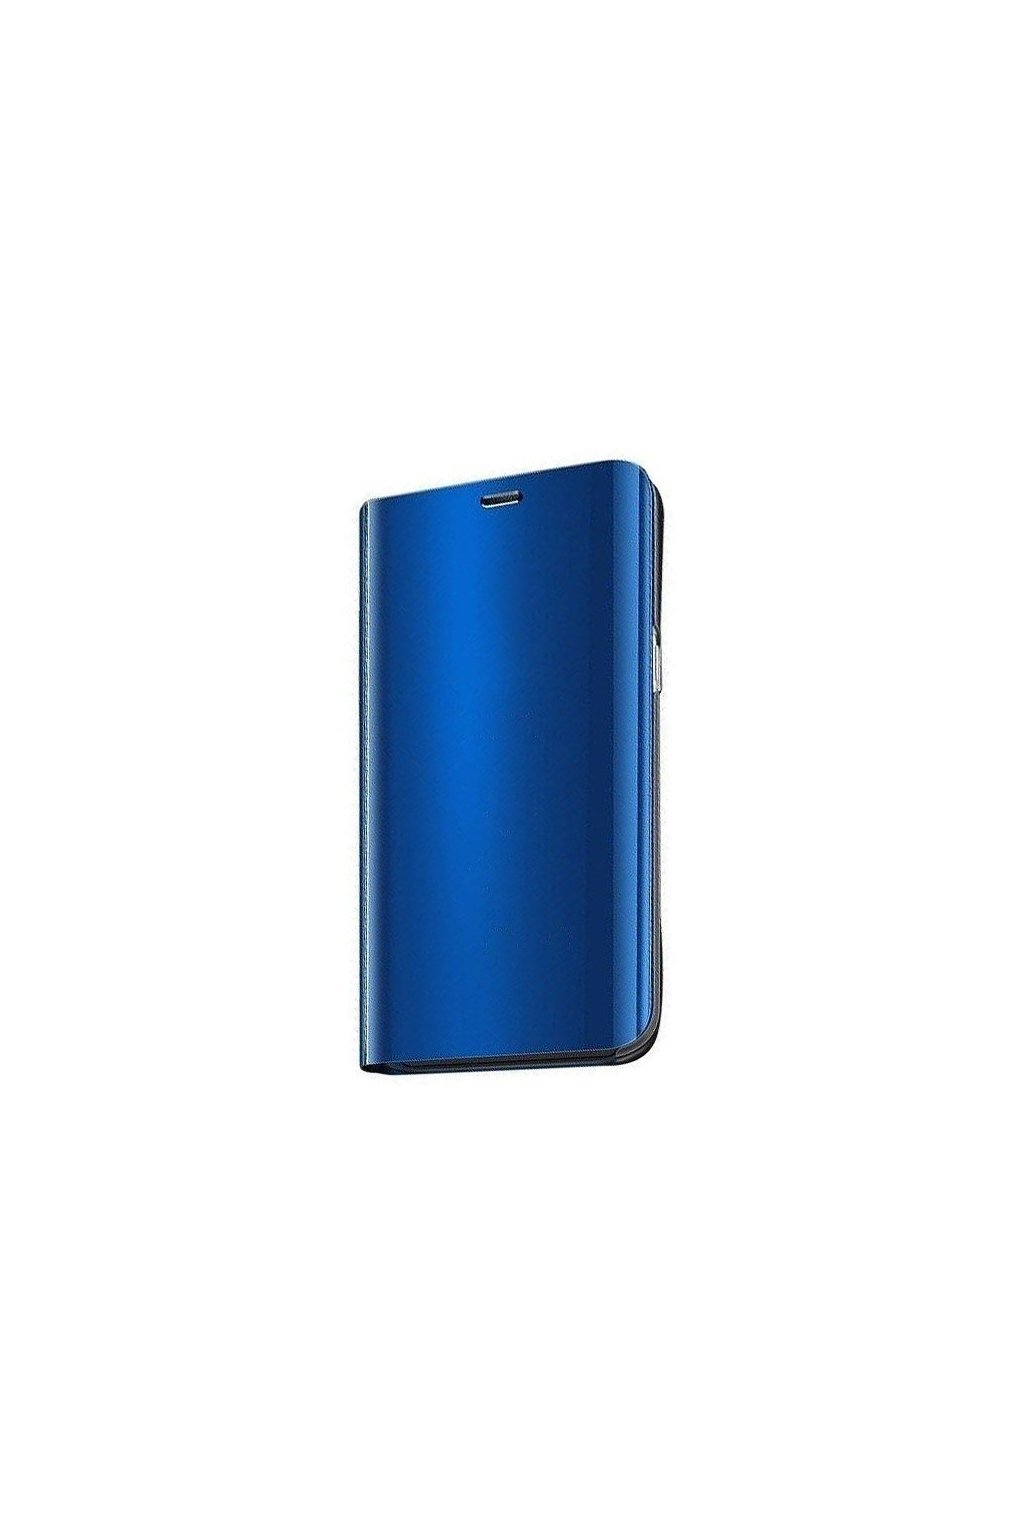 eng pl Clear View Case cover for Xiaomi Redmi 9C blue 62395 1